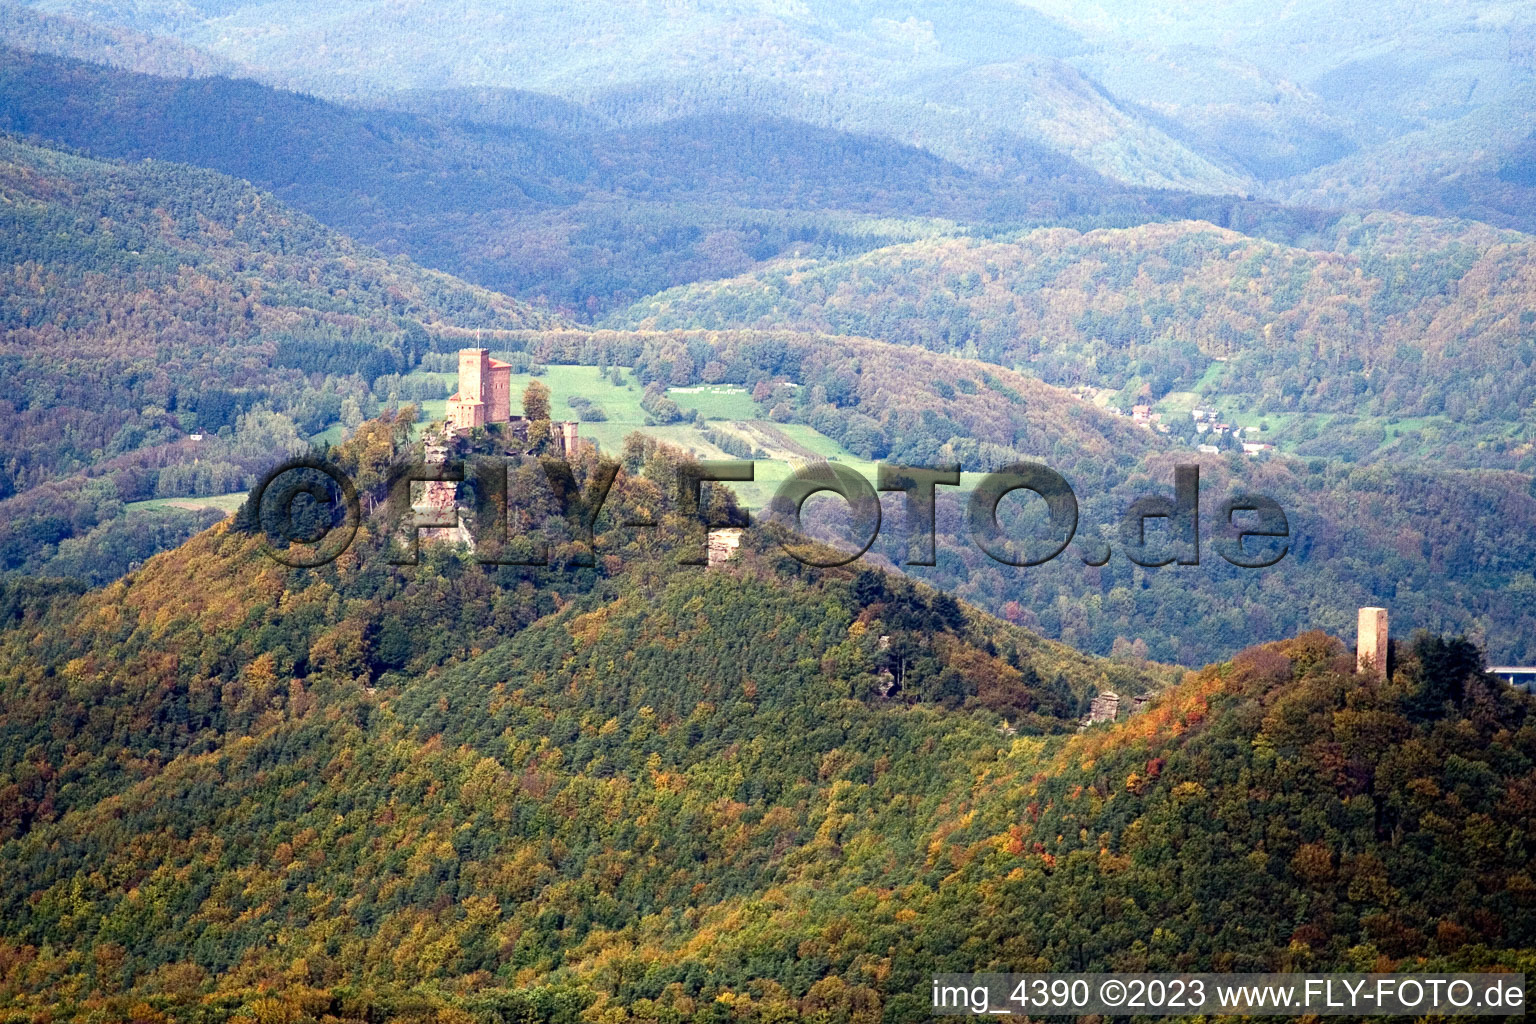 Bird's eye view of Trifels Castle in the district Bindersbach in Annweiler am Trifels in the state Rhineland-Palatinate, Germany